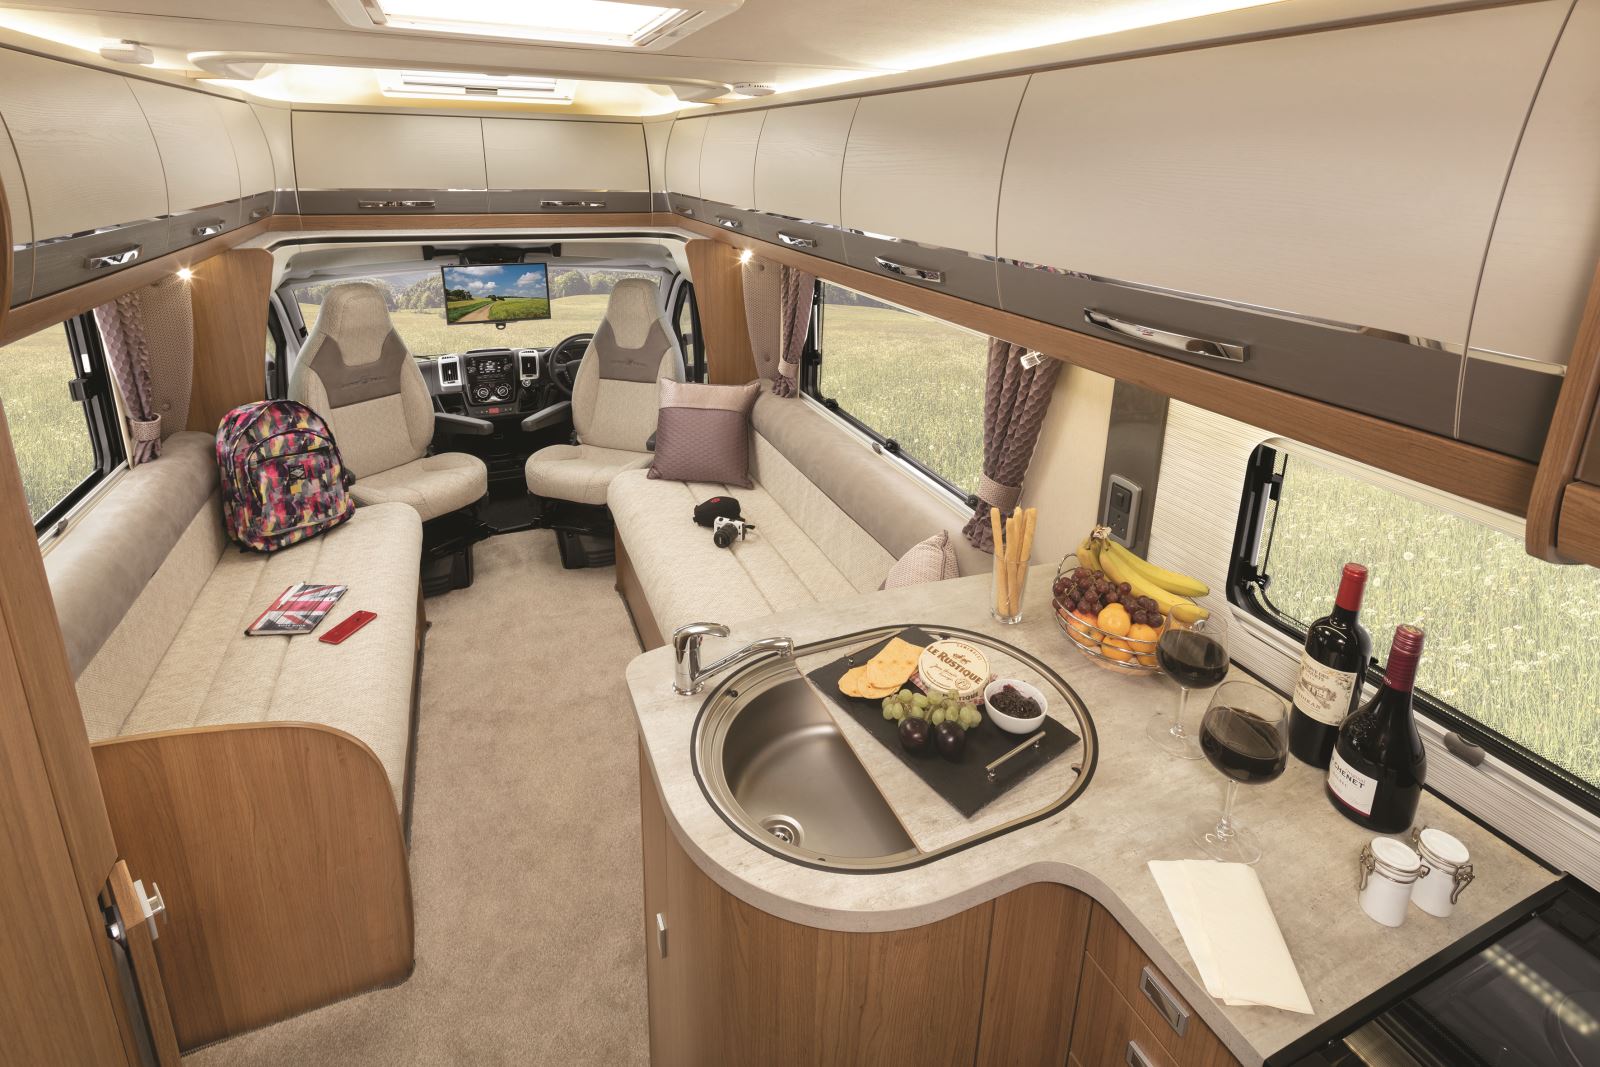 Interior of the Auto-Trail Tracker RS motorhome